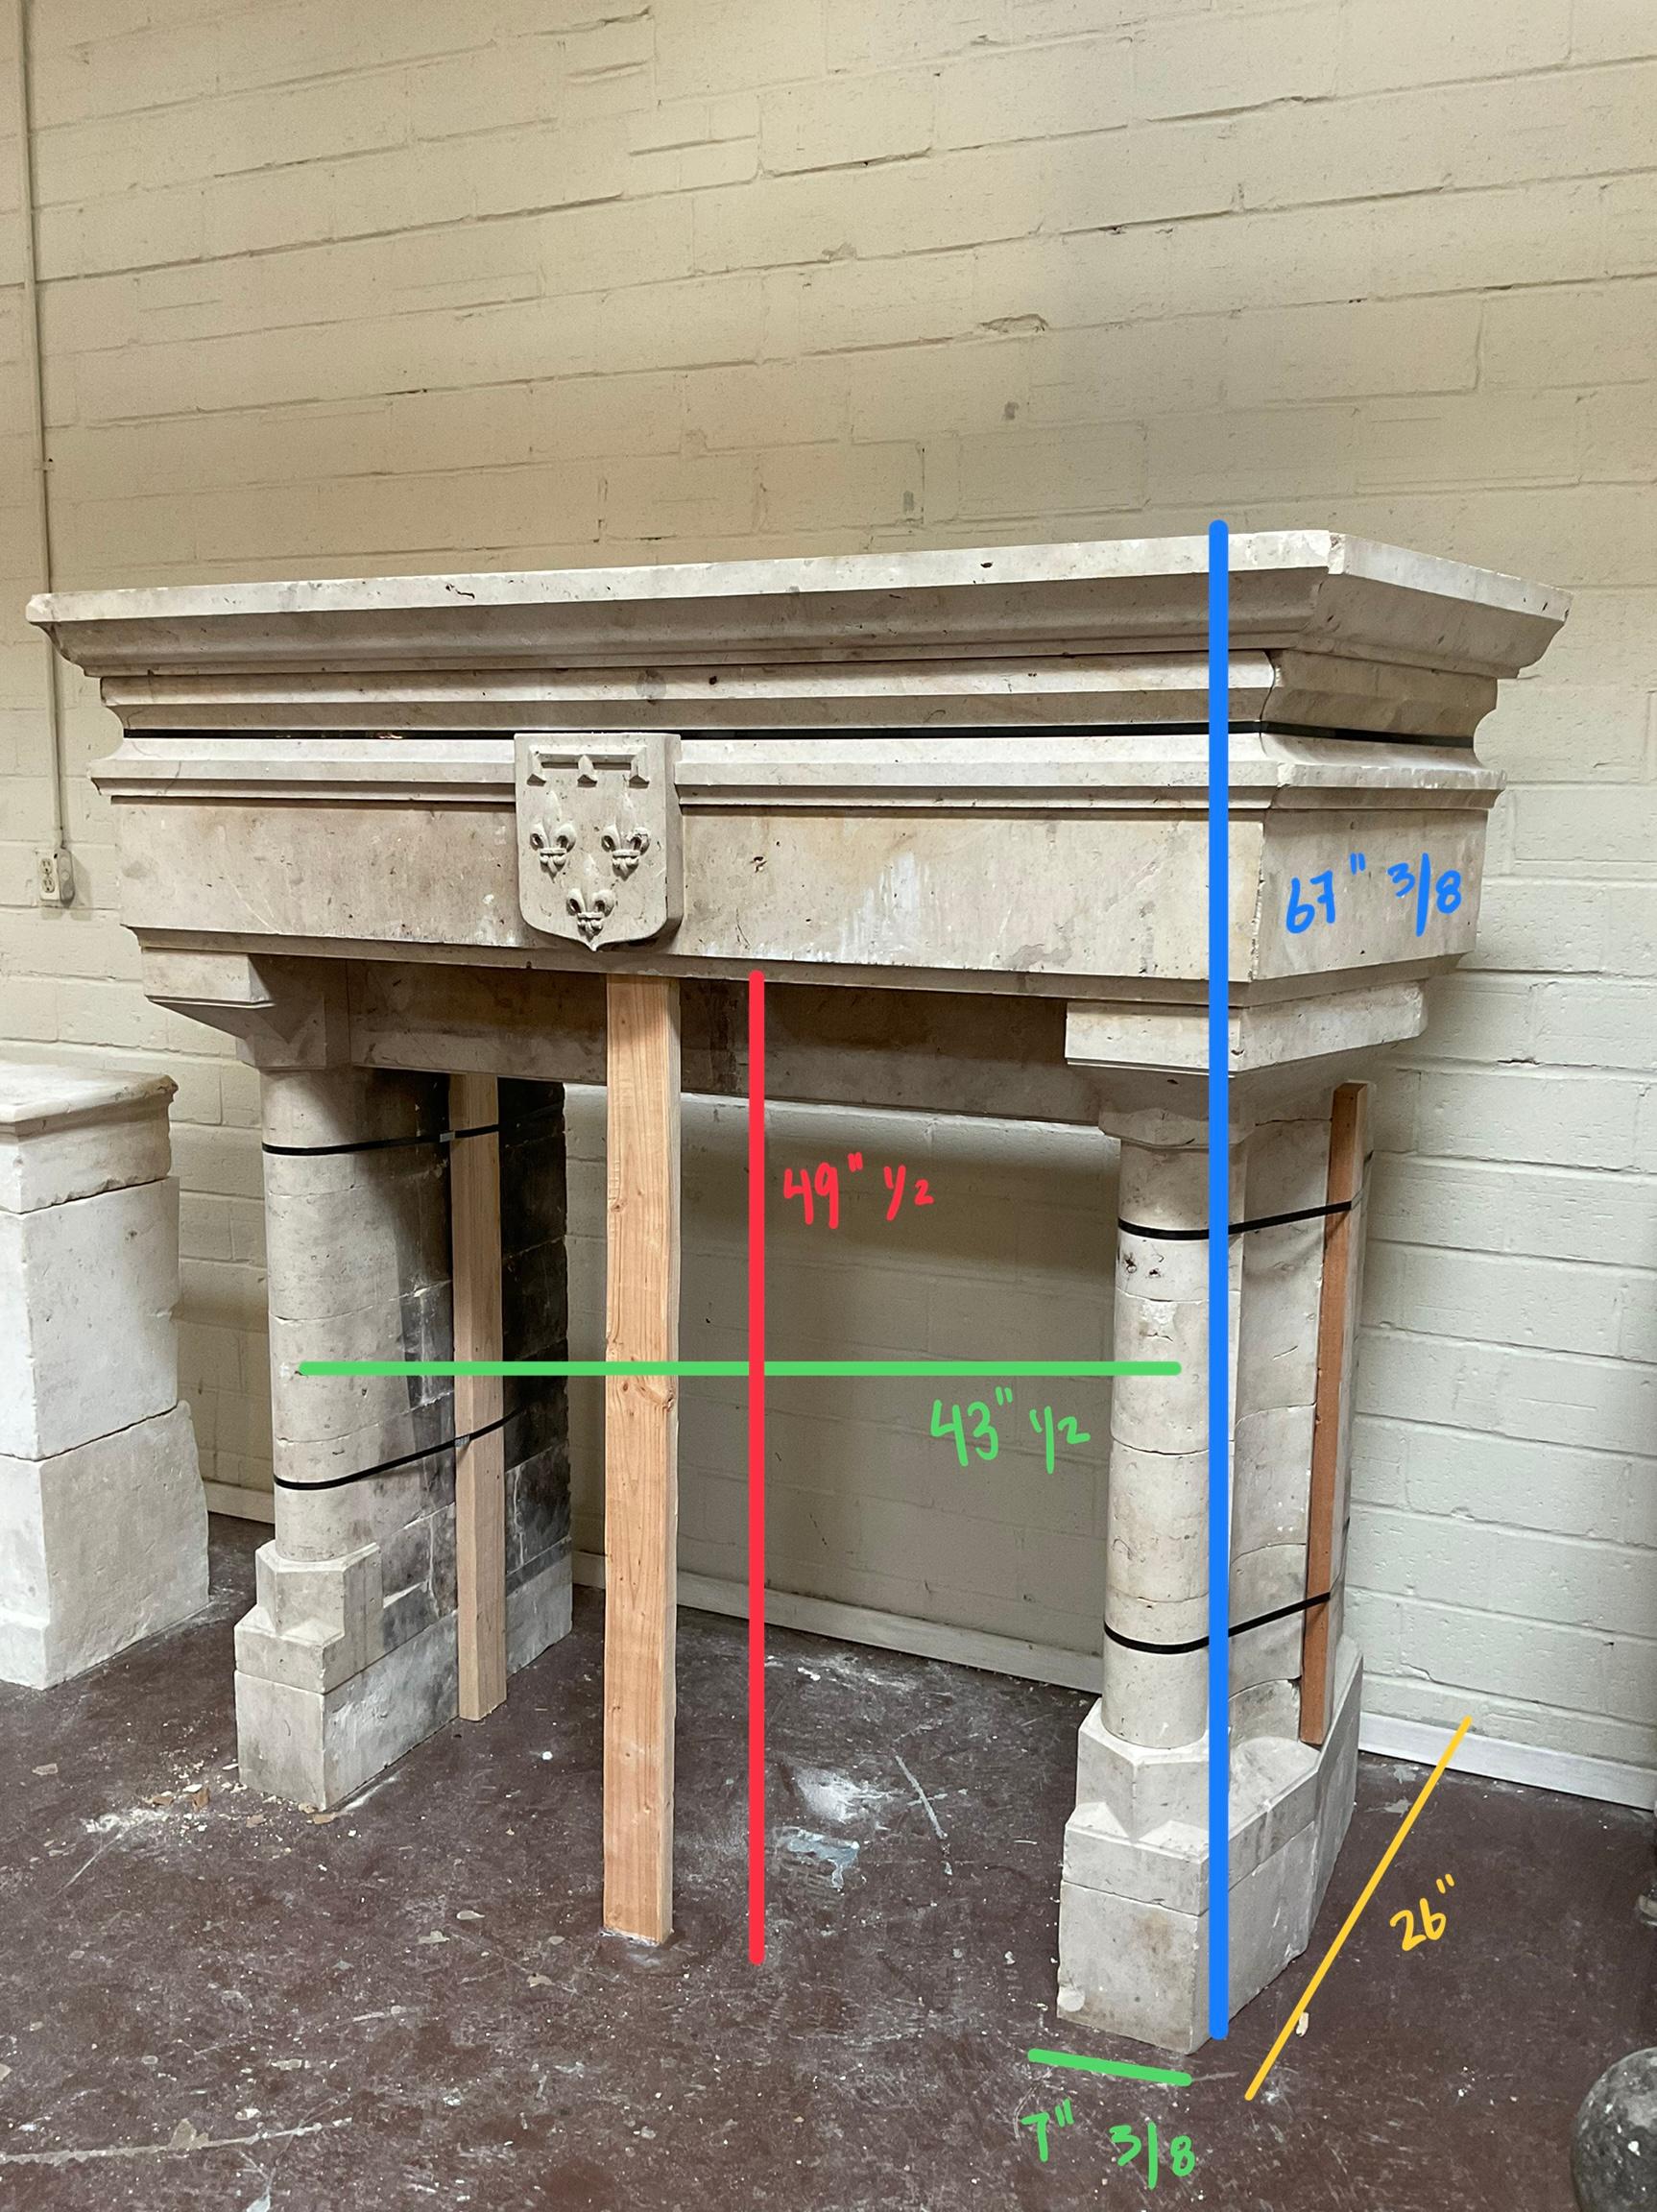 French Limestone Mantel For Sale 4